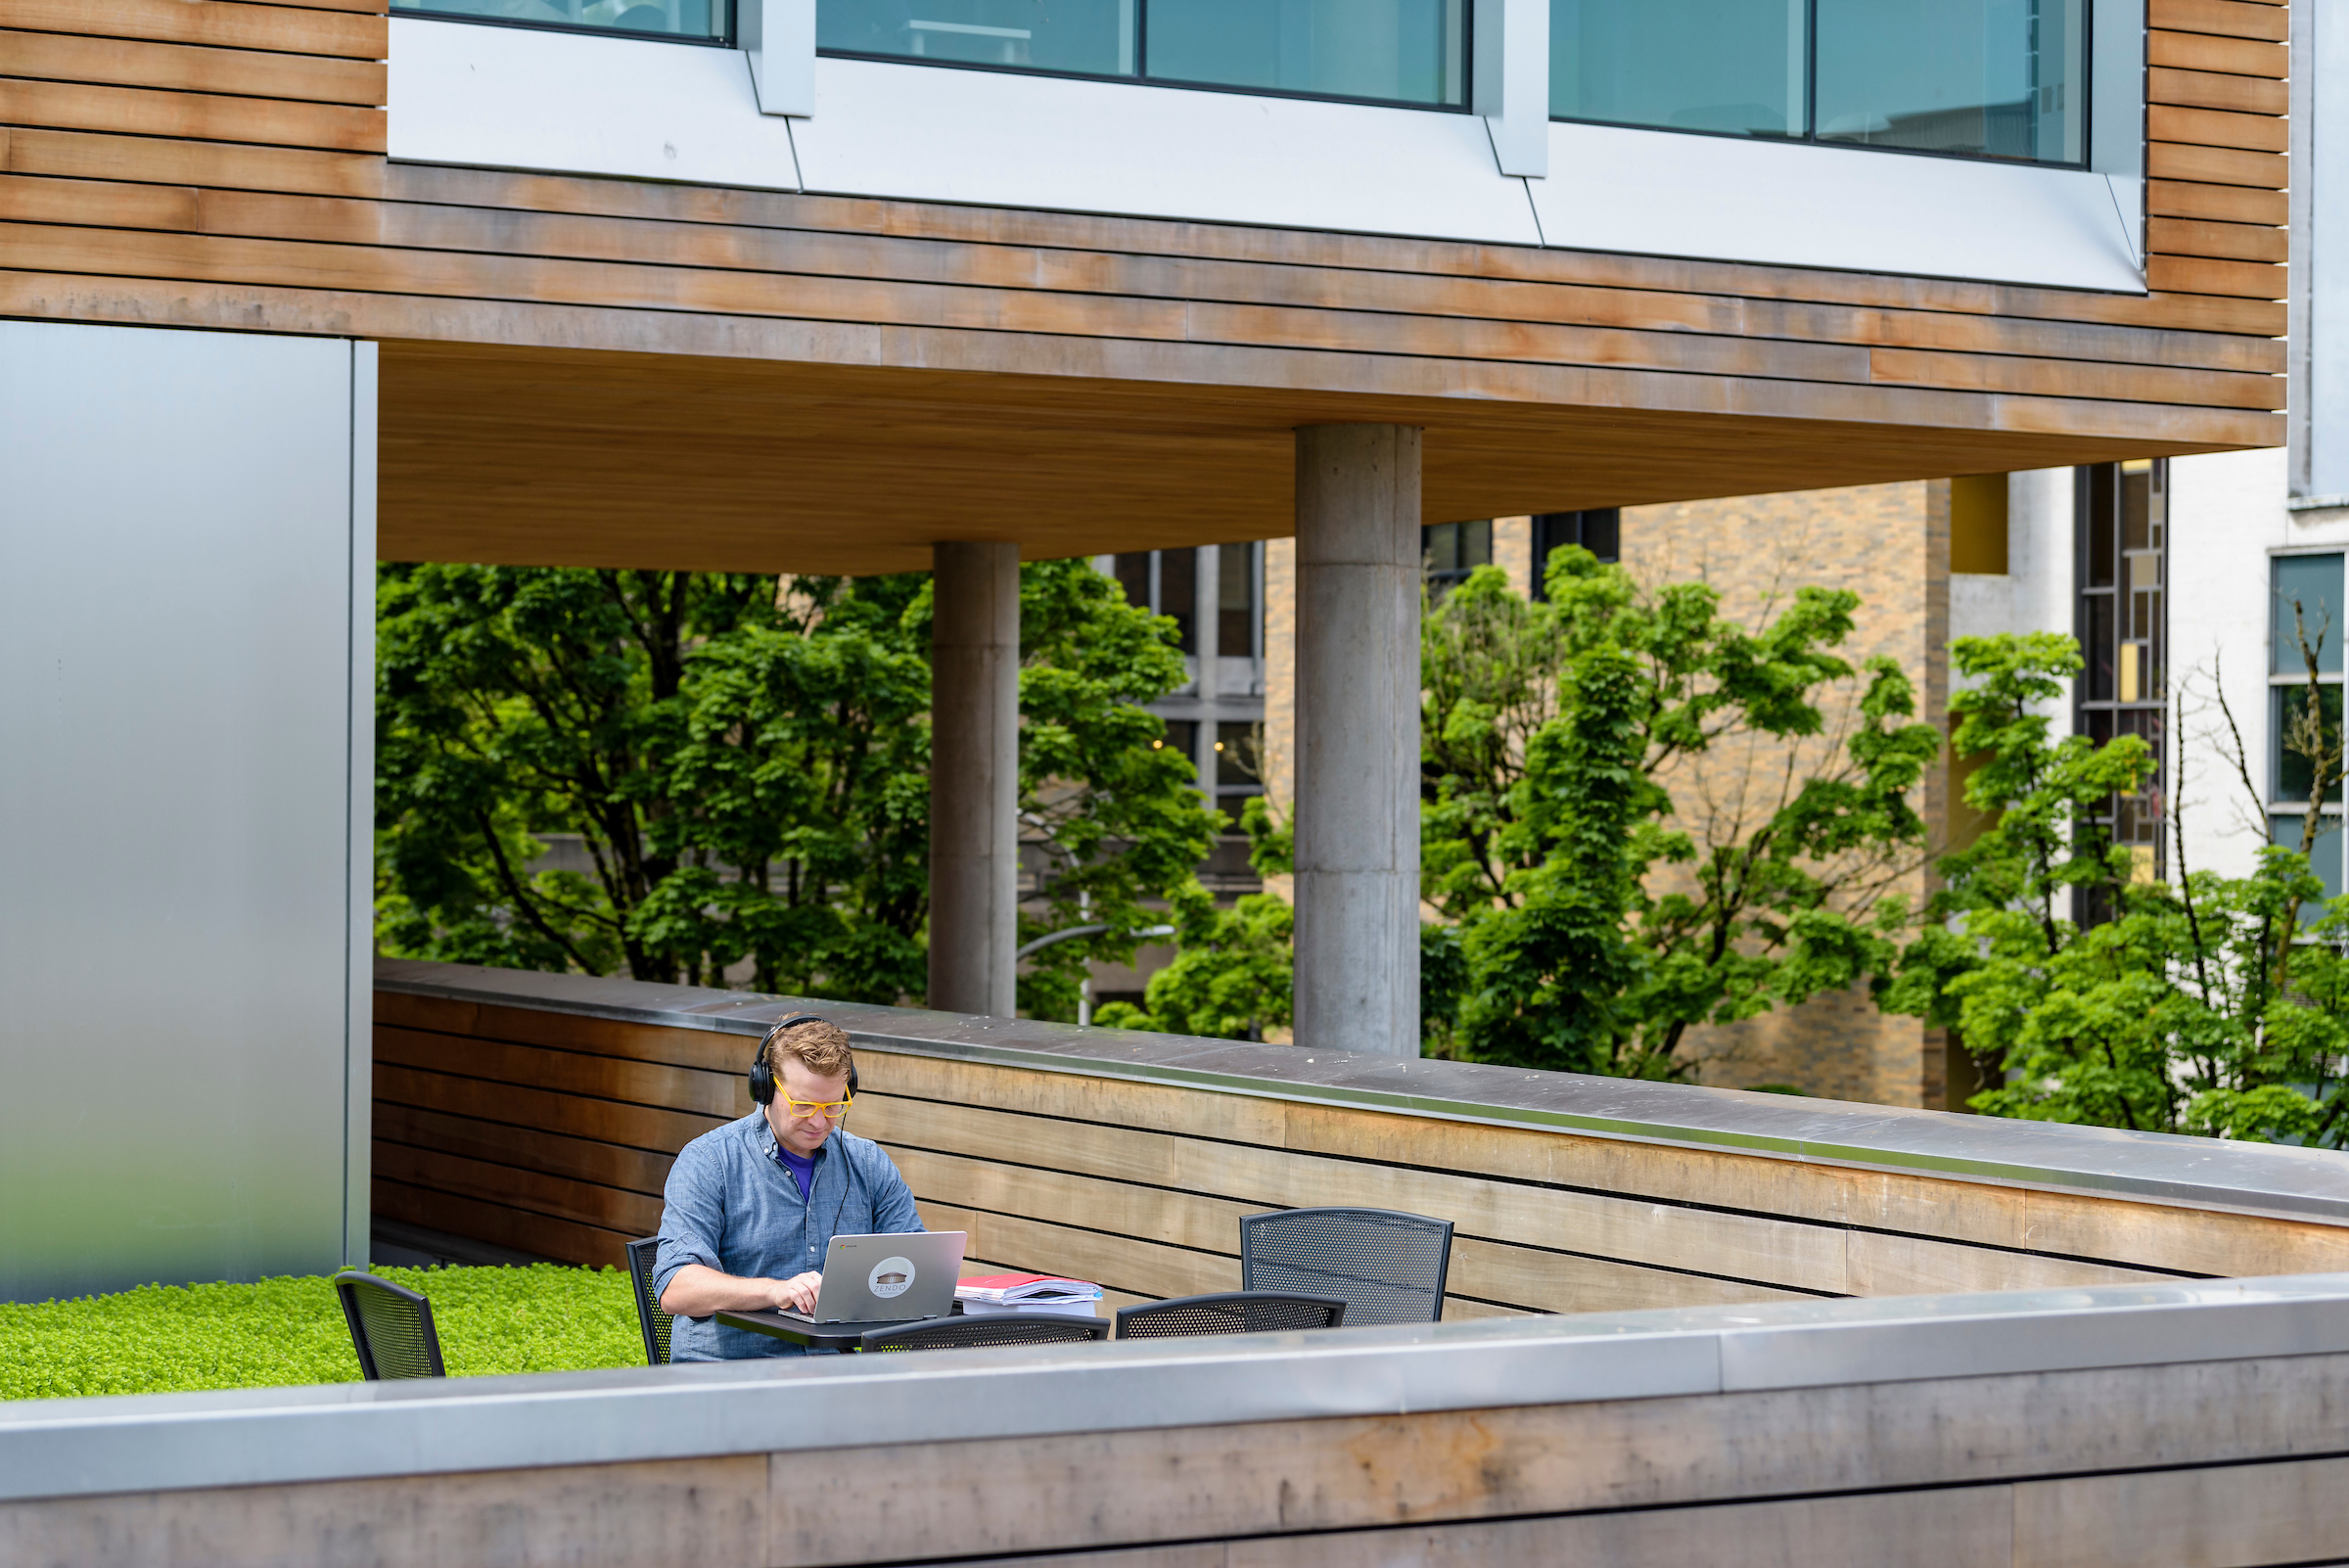 PSU online student studying on rooftop terrace